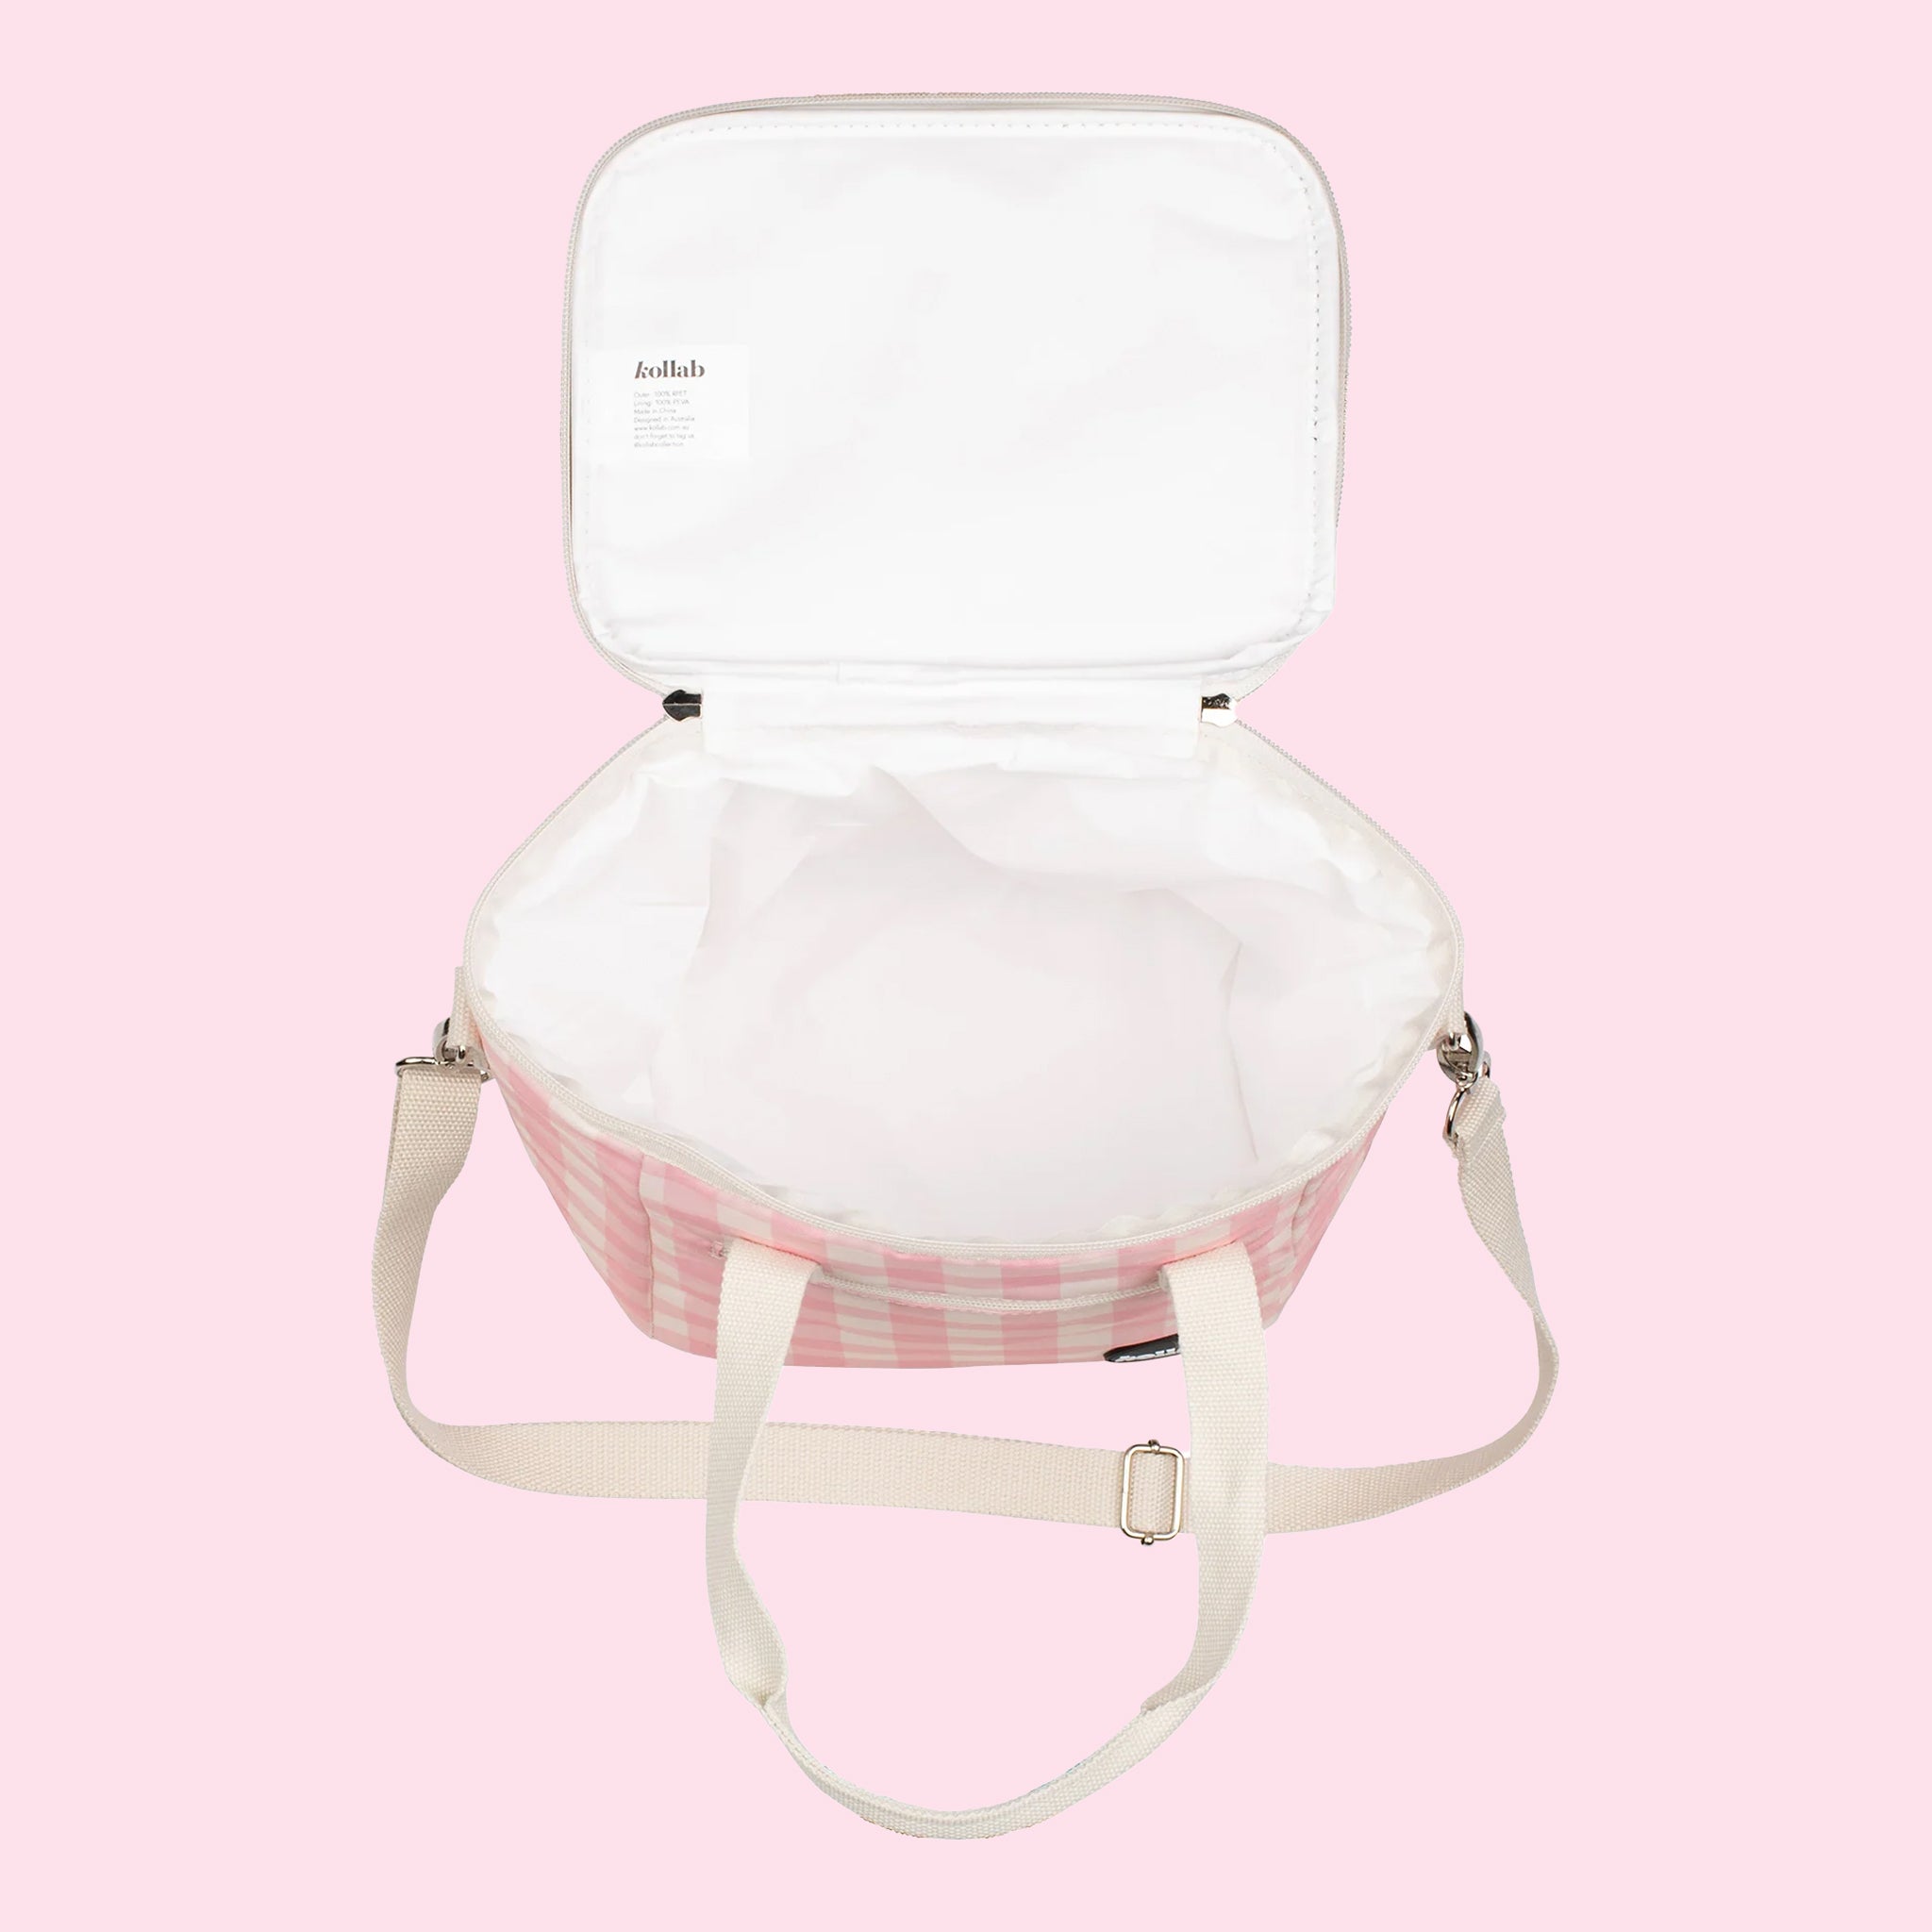 On a light pink background is a pink and white cooler bag with a long adjustable strap.